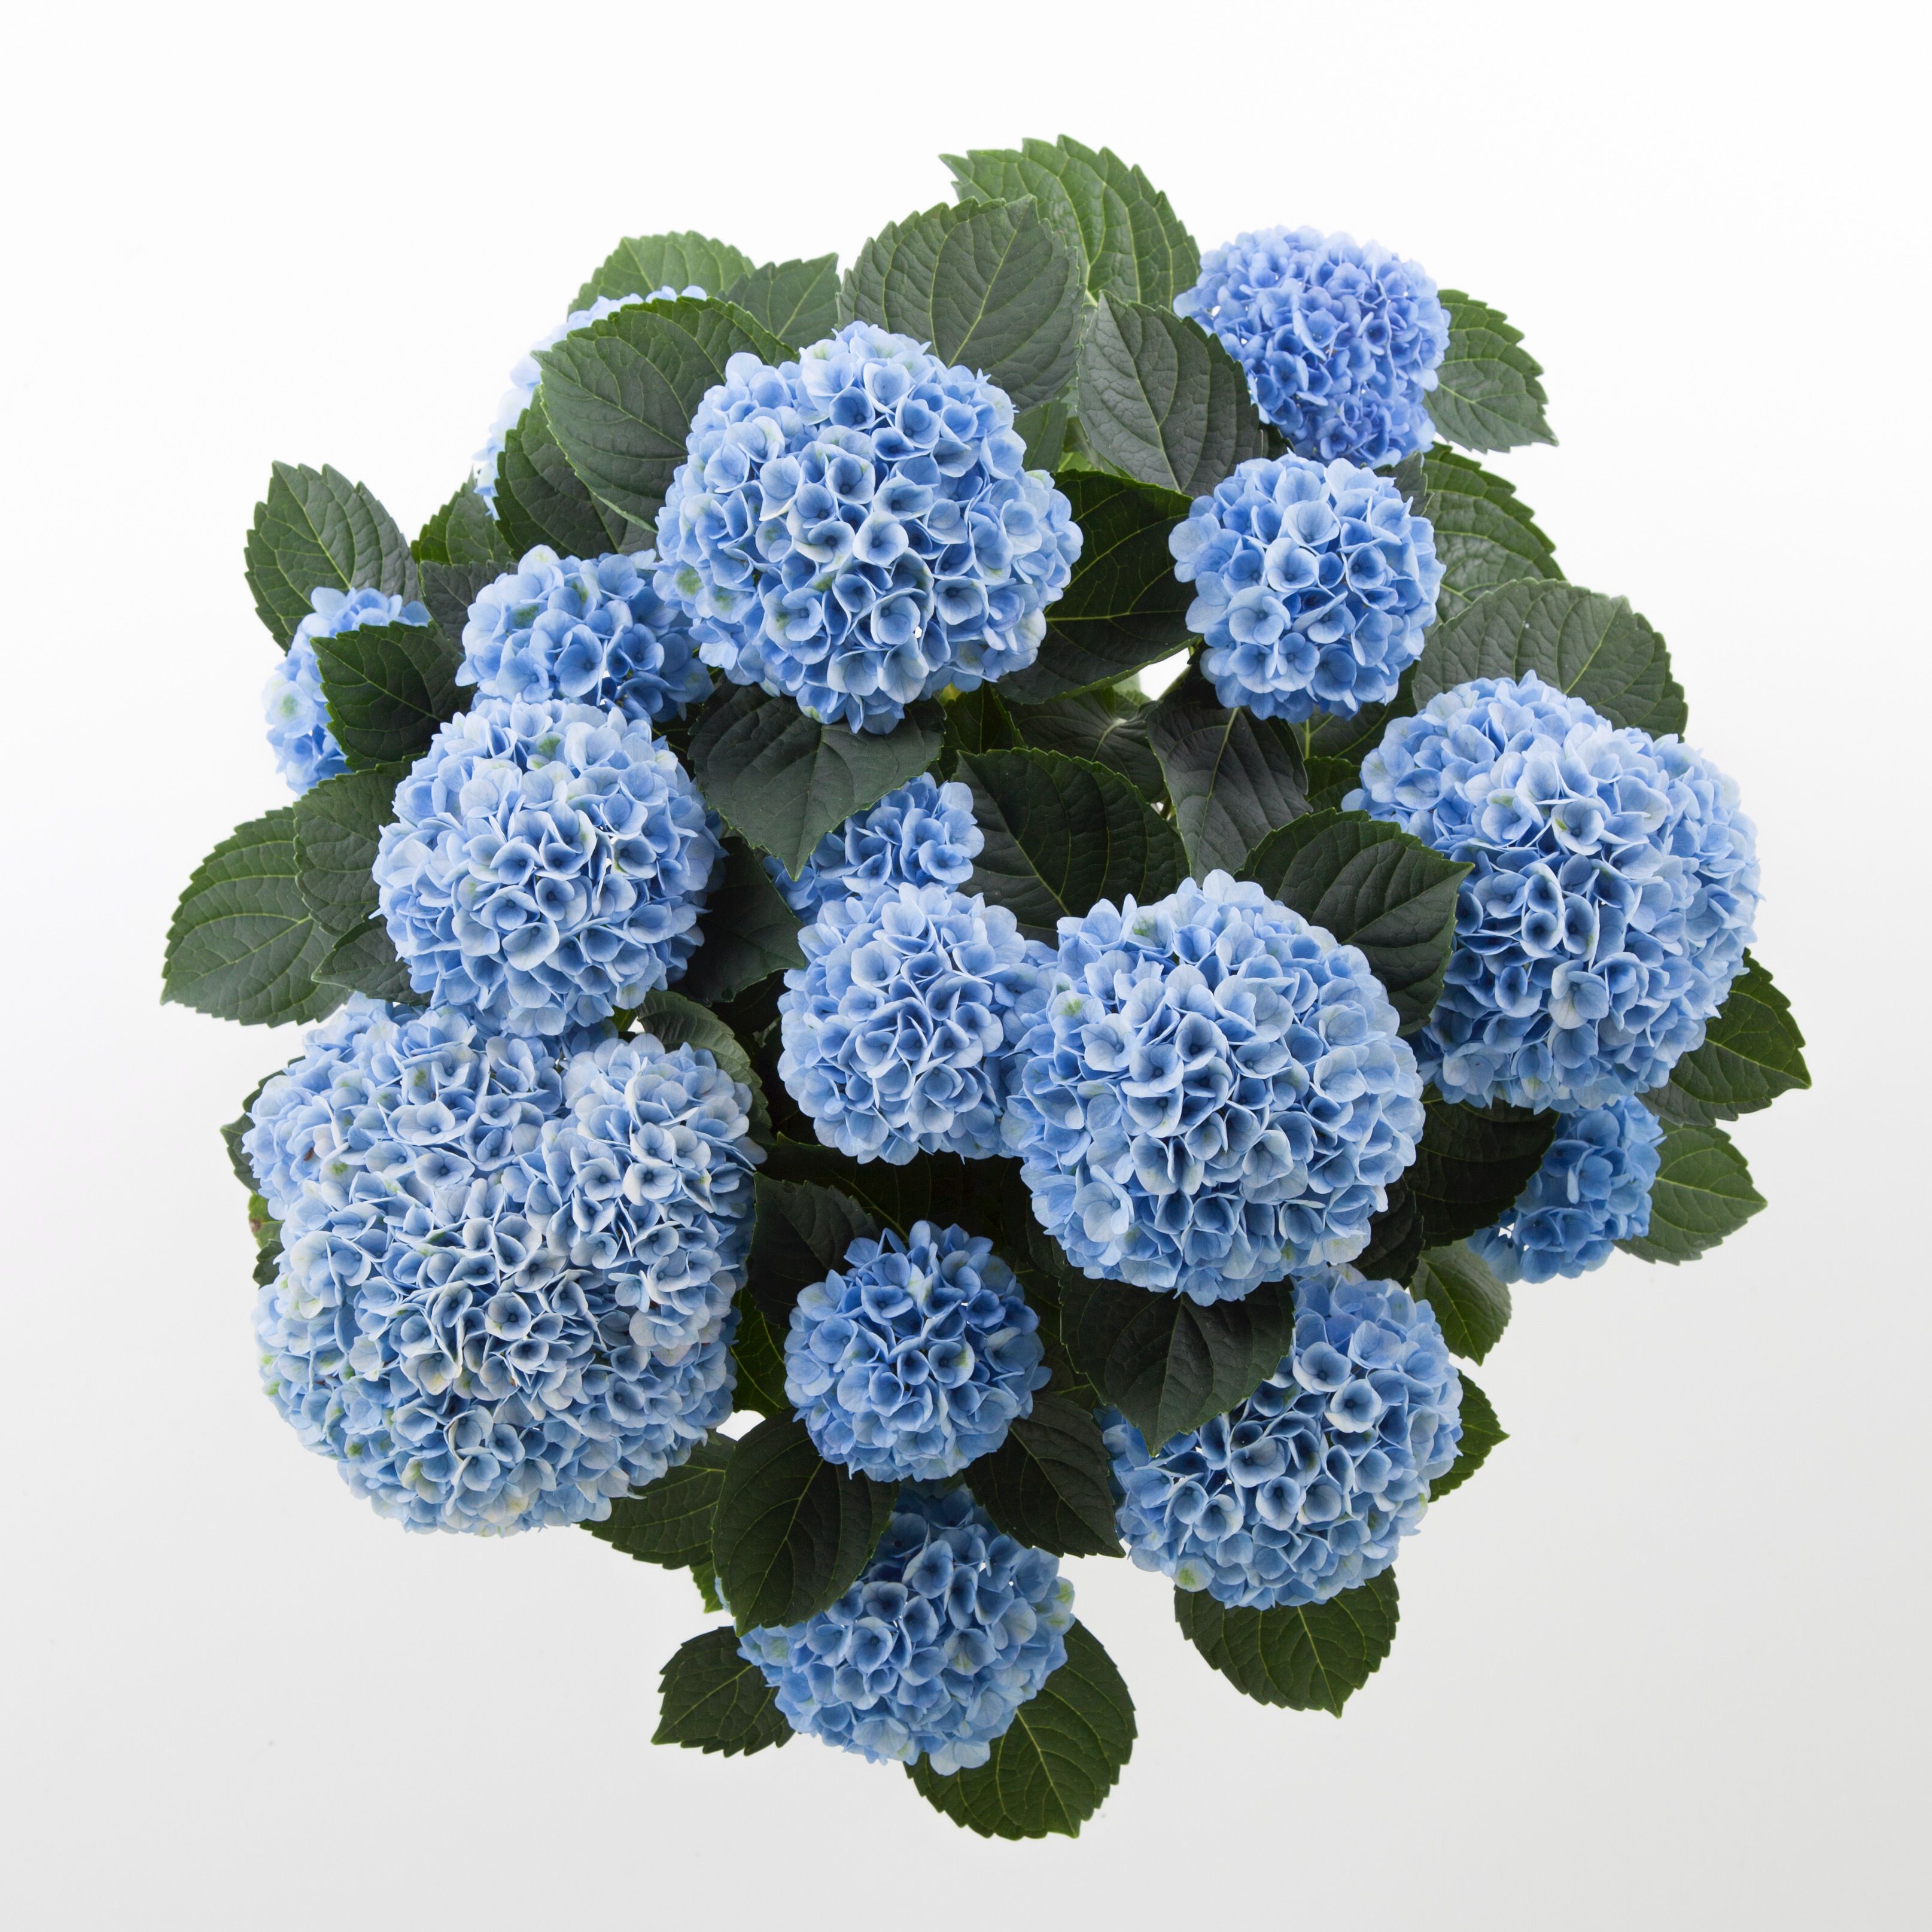 images/plants/hydrangea/hyd-magical-everlasting-revolution/hyd-magical-everlasting-revolution-0094.jpg